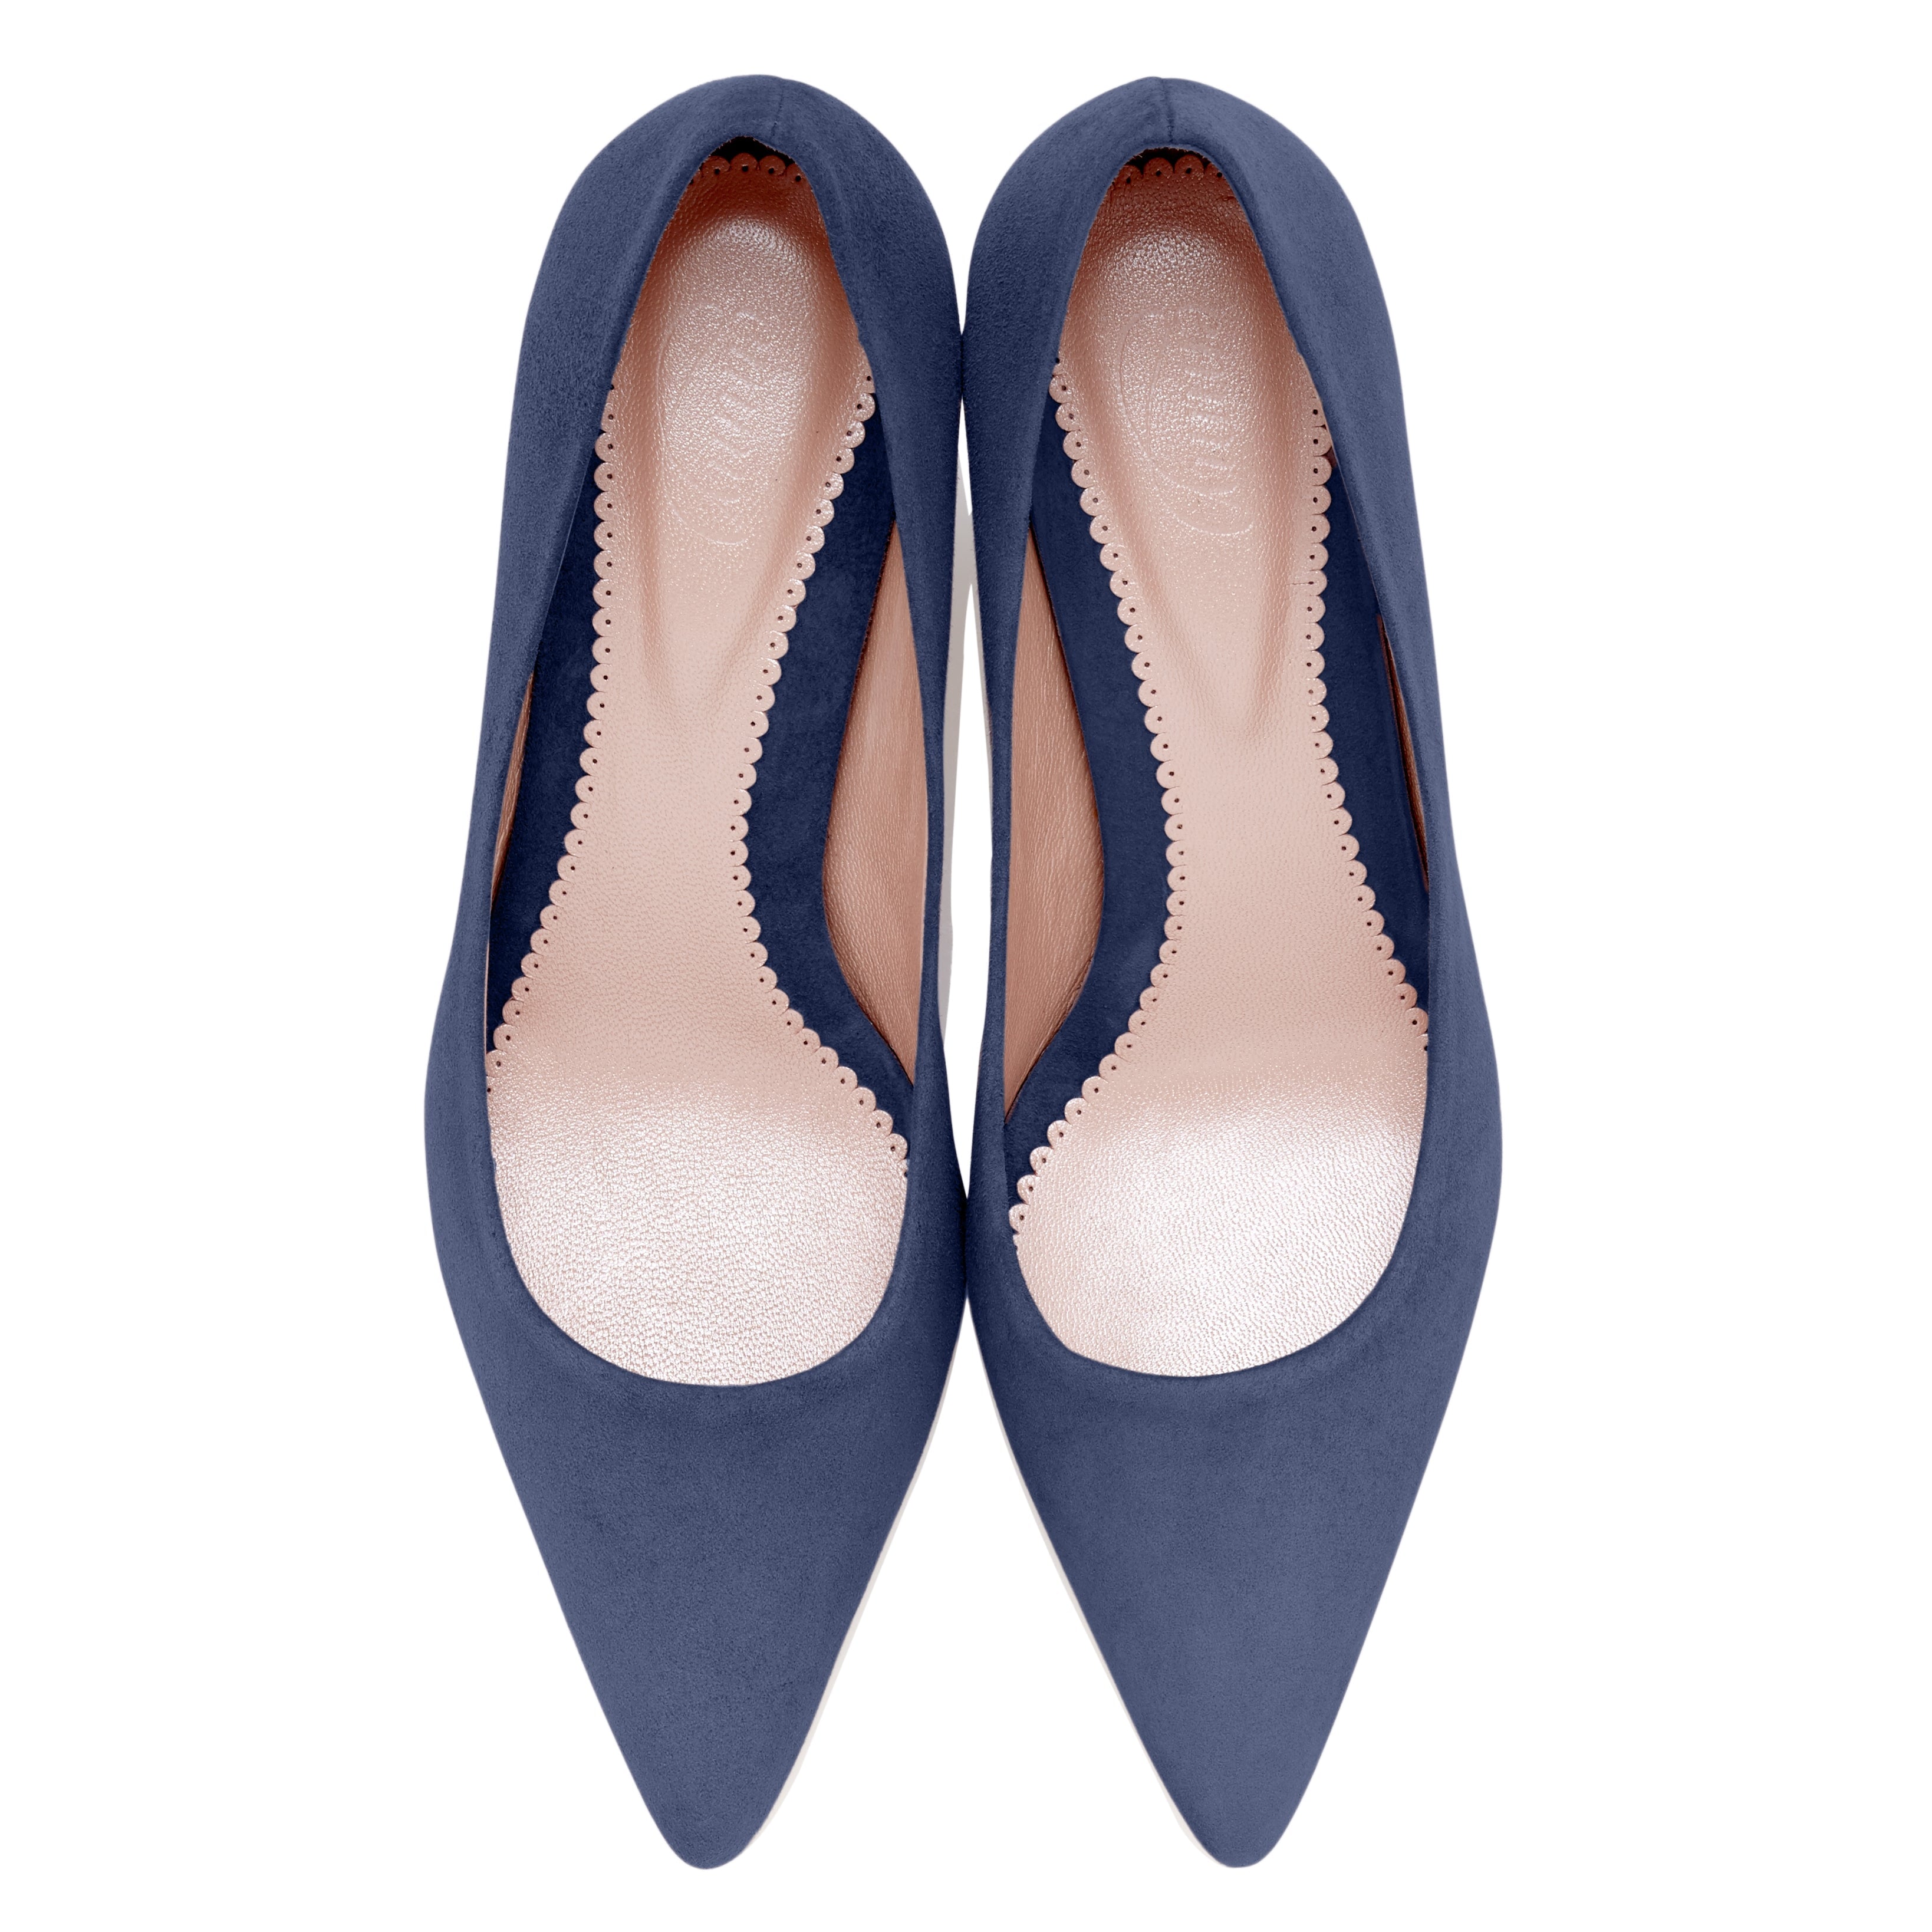 Rebecca High Heel Fashion Shoe Blue-Grey Suede Pointed Court  image